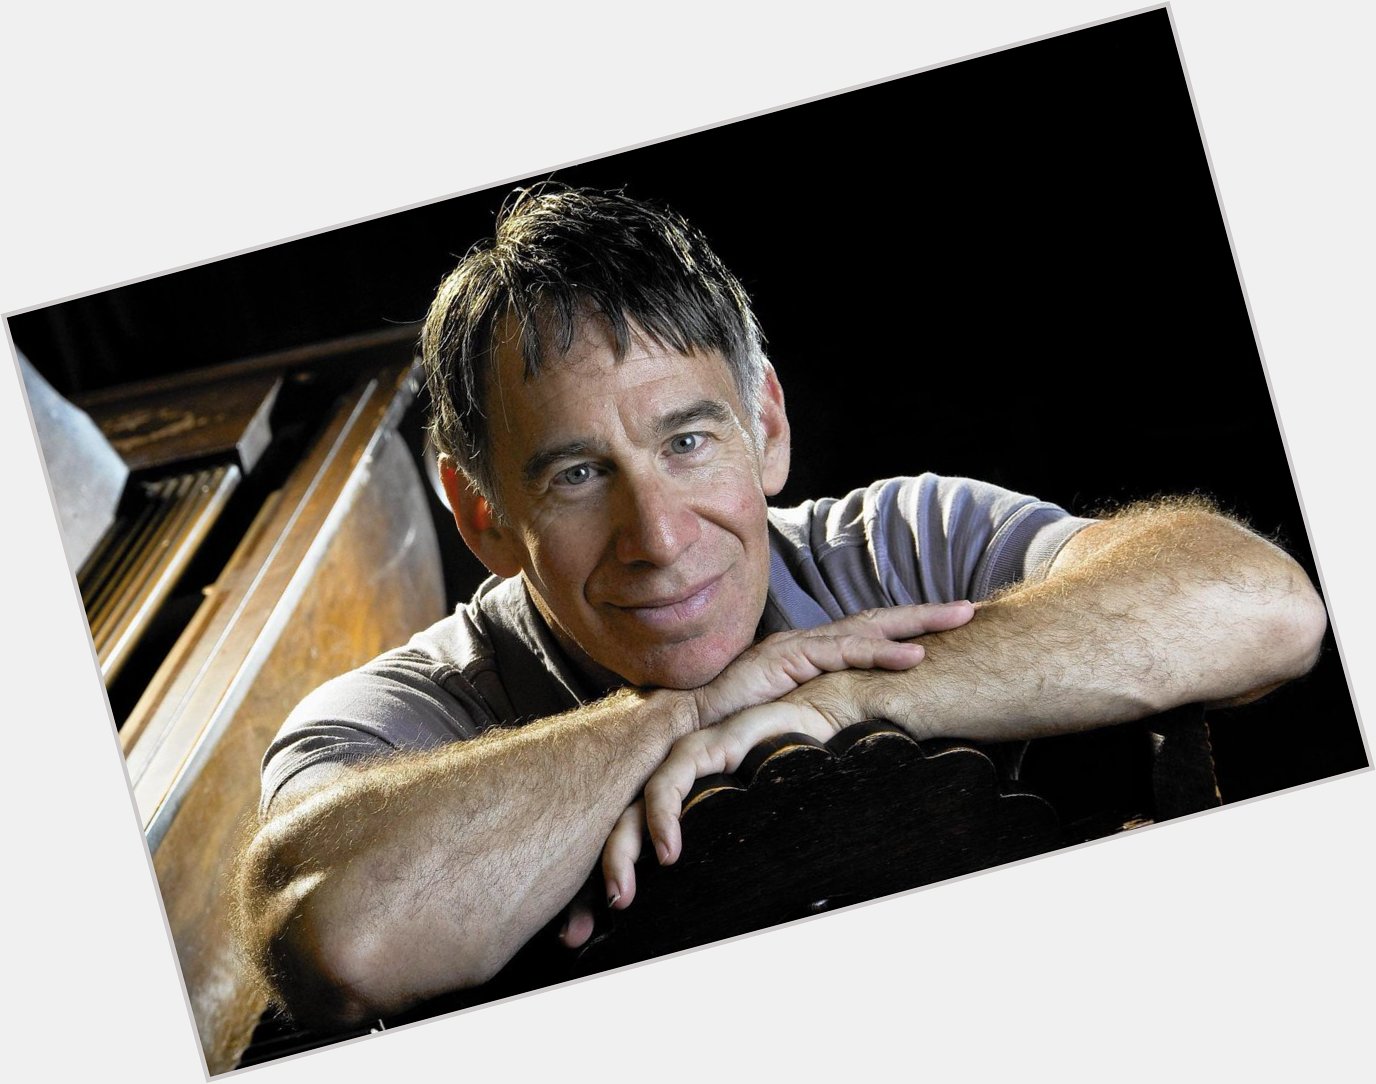 Happy birthday to Stephen Schwartz, lyricist for POCAHONTAS, THE HUNCHBACK OF NOTRE DAME, and ENCHANTED! 